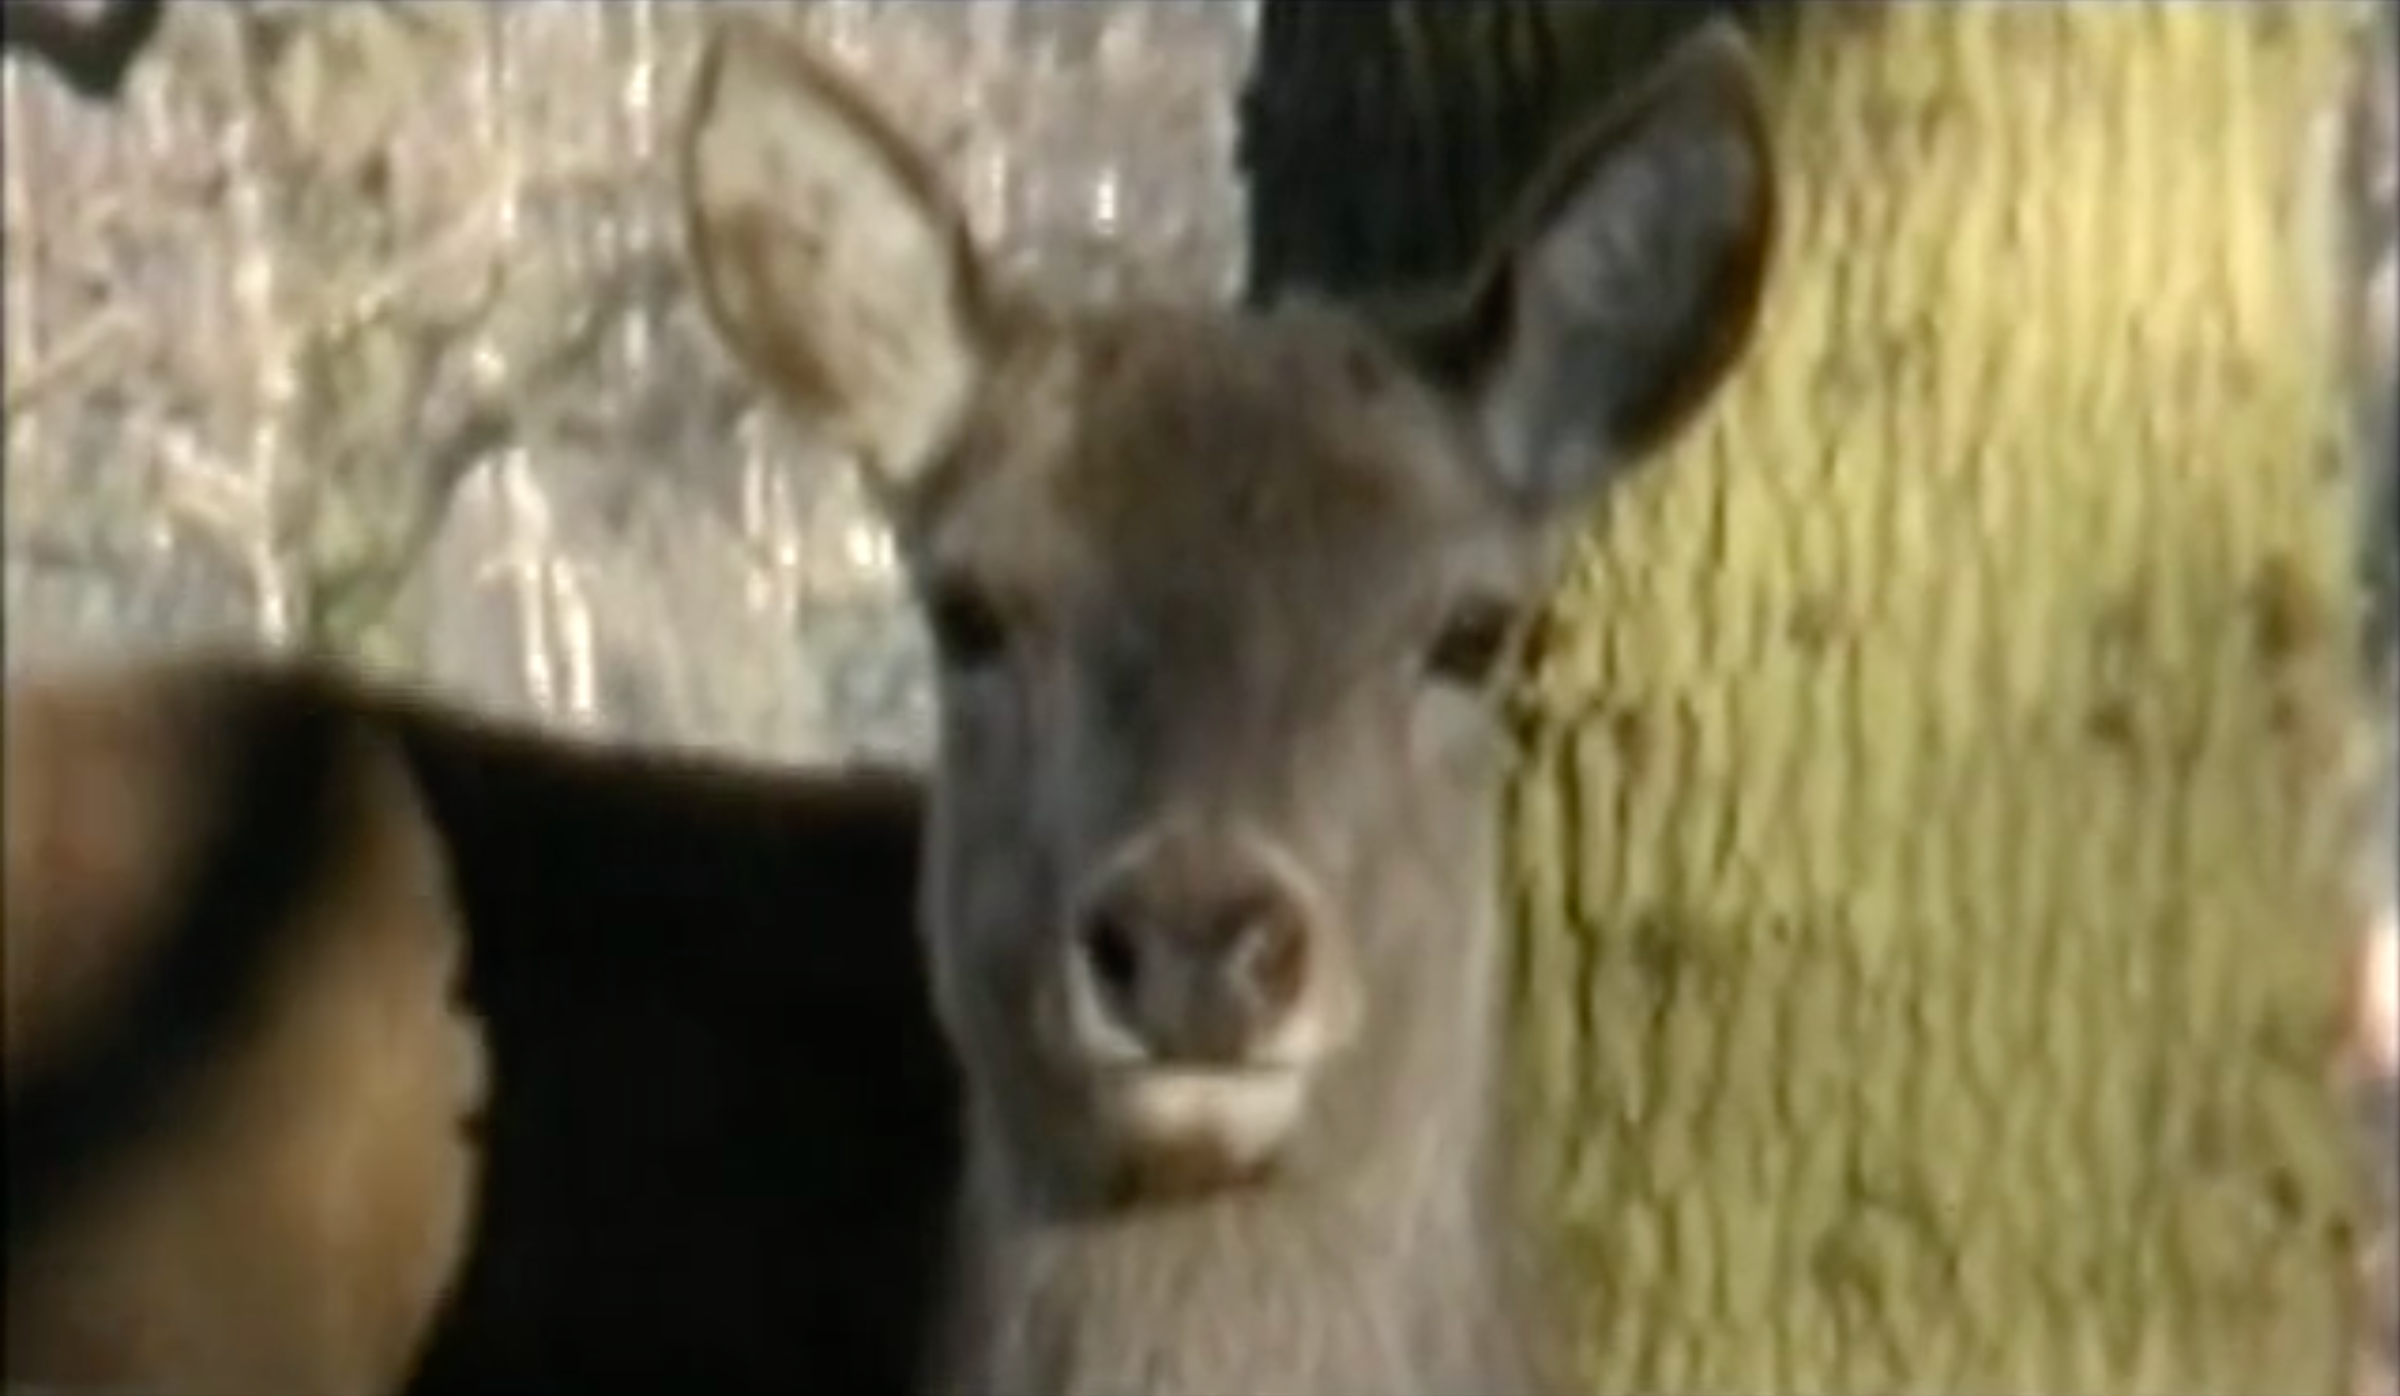 Image of a deer looking directly at the camera with a tree and another deer in the background